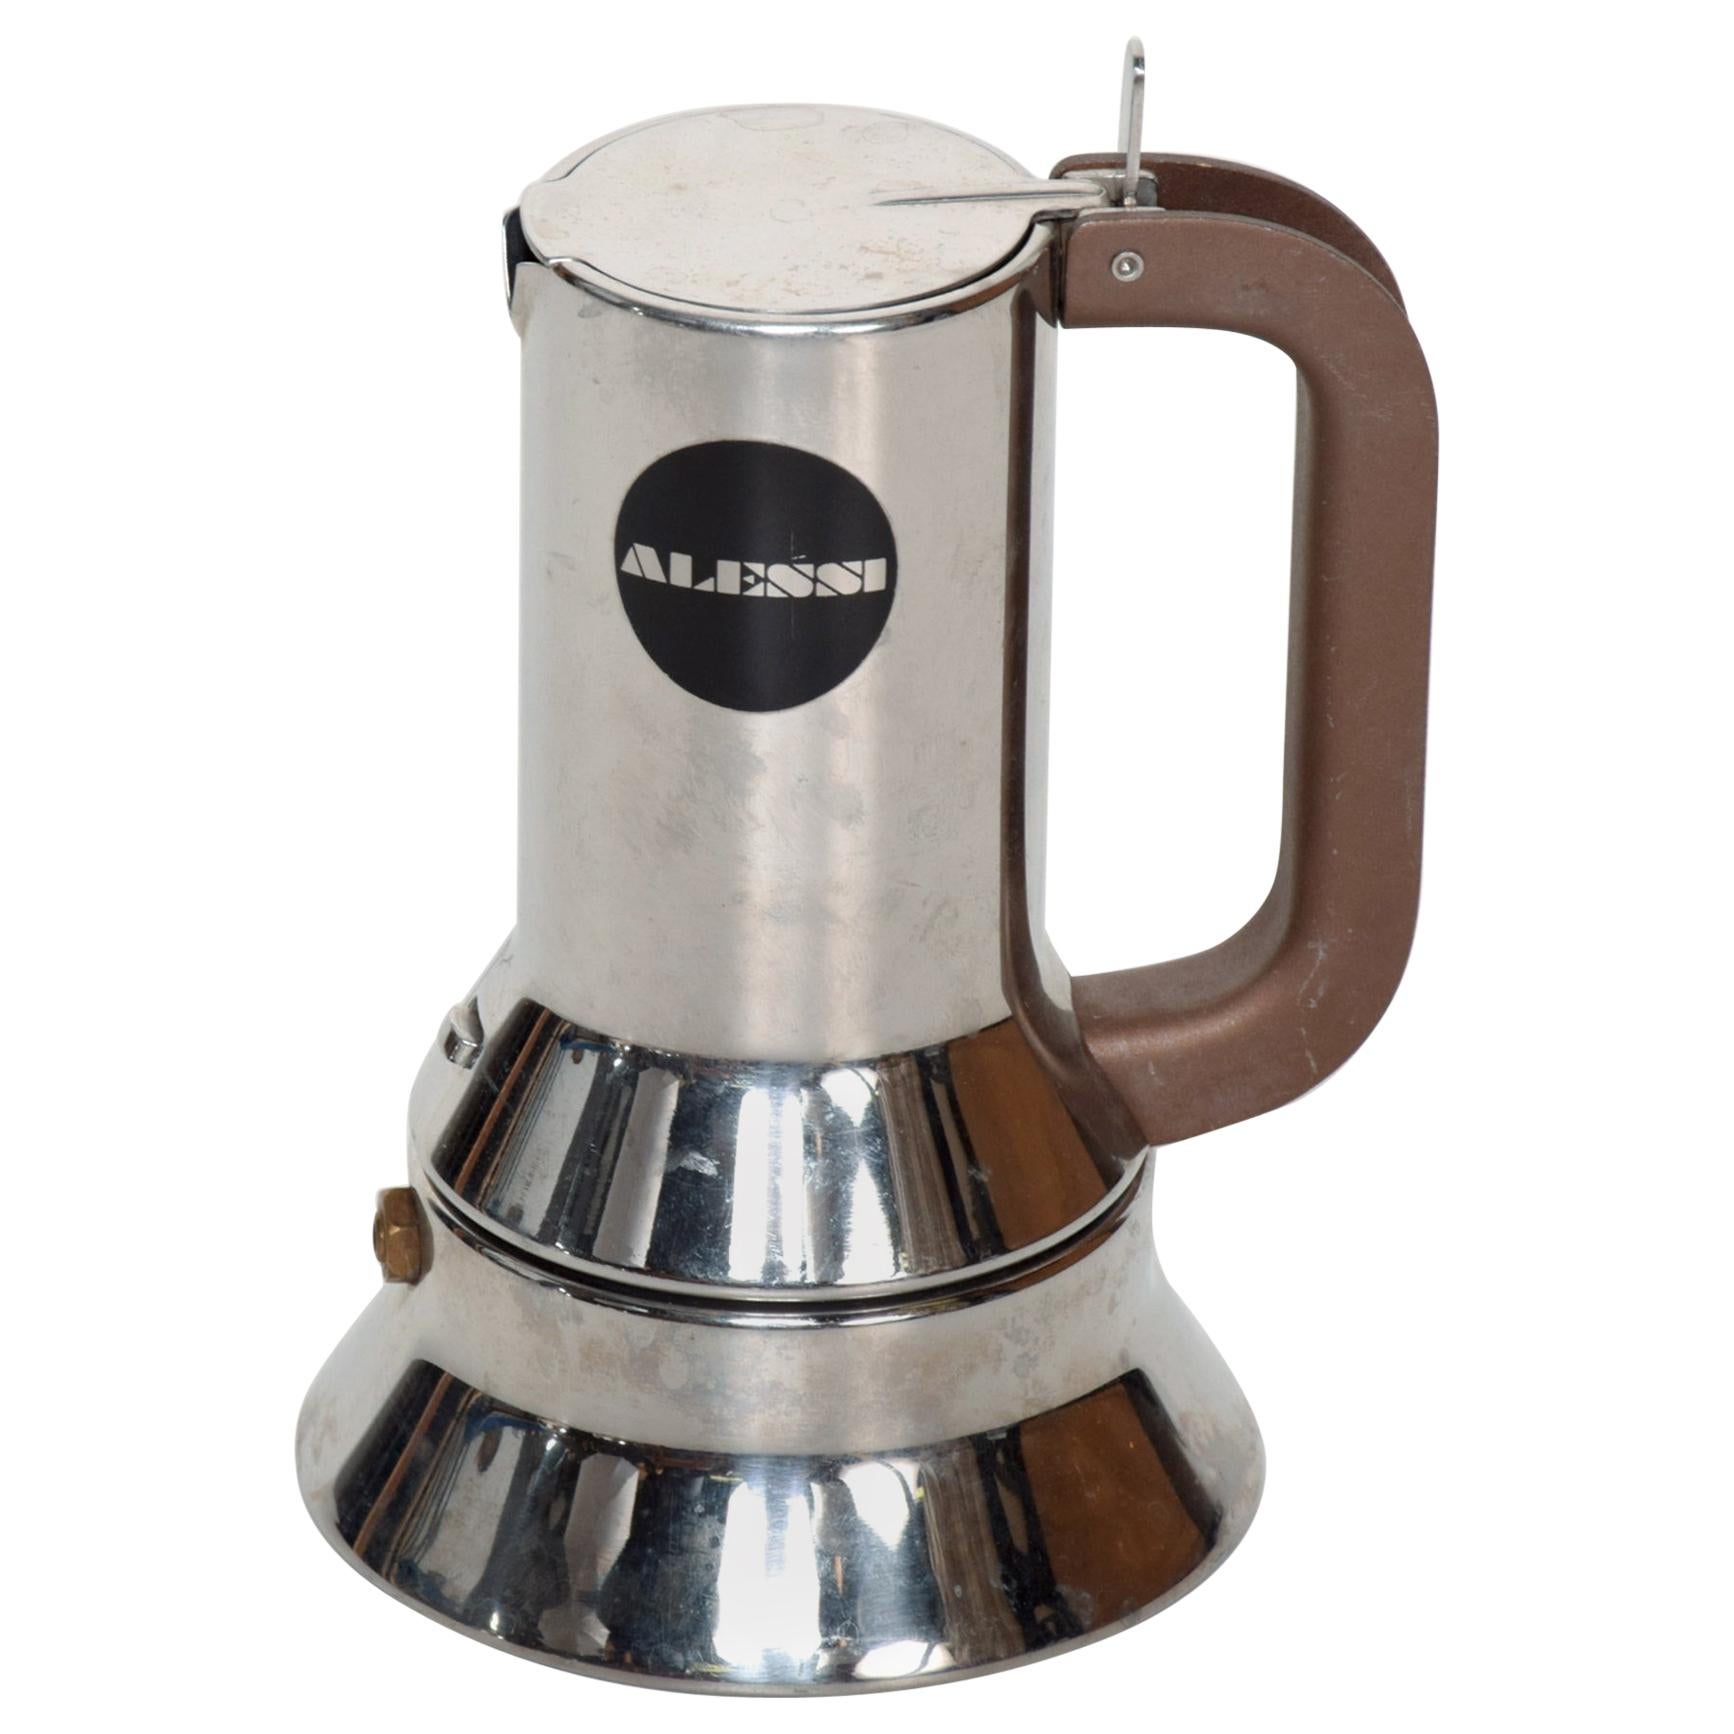 https://a.1stdibscdn.com/richard-sapper-for-alessi-stylish-coffee-expresso-maker-vintage-modern-italy-80s-for-sale/1121189/f_238634221621682684798/23863422_master.jpg